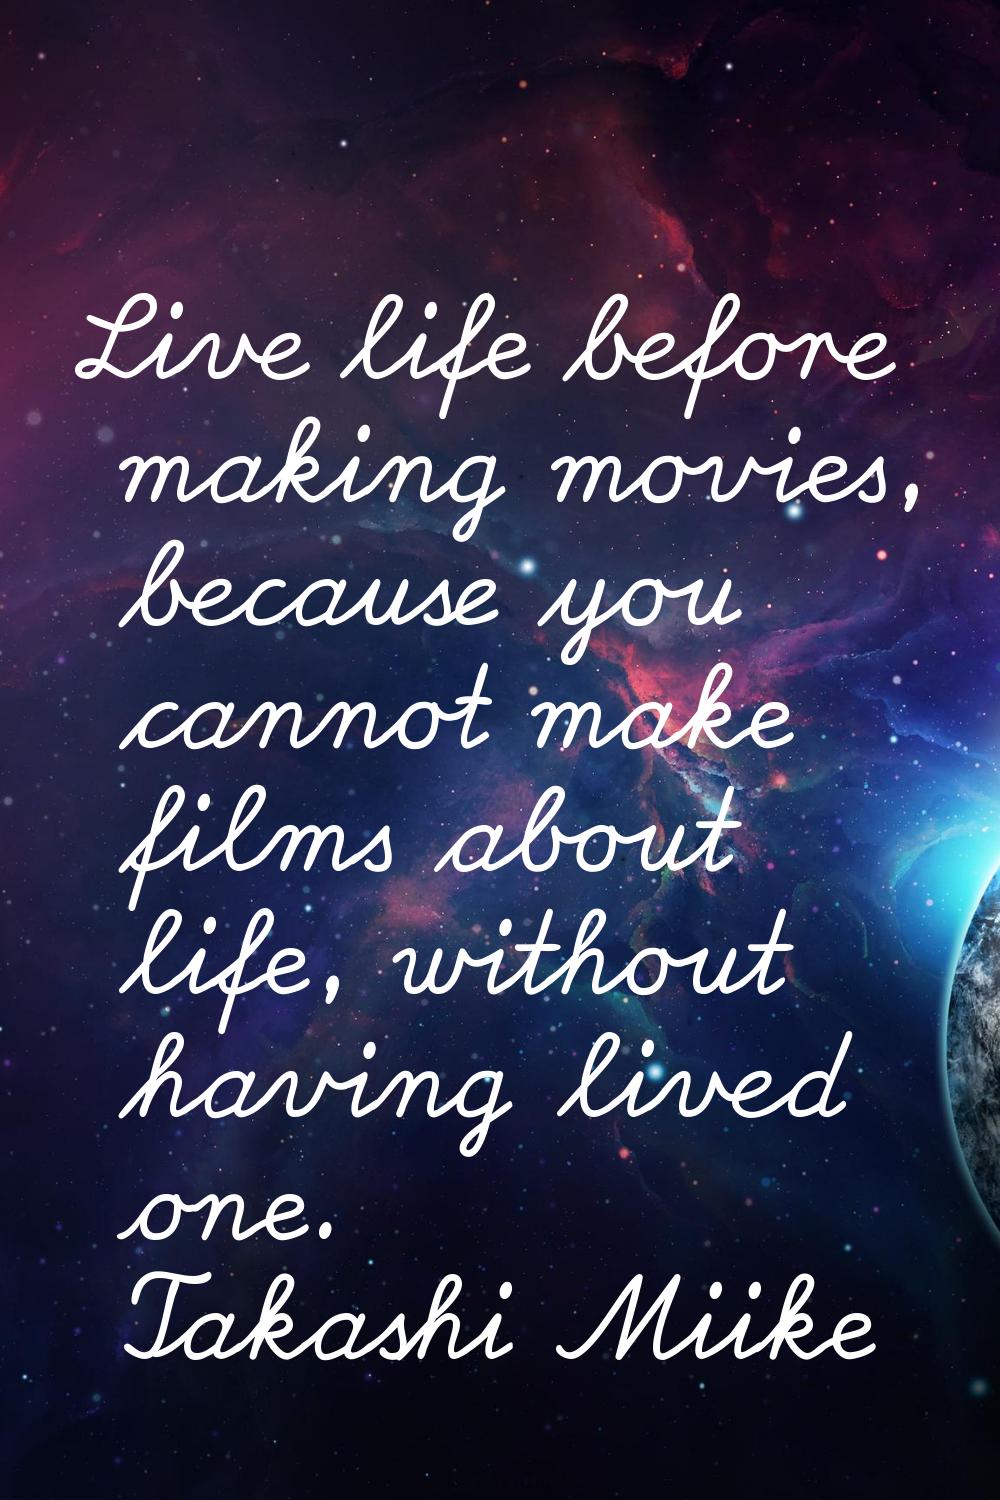 Live life before making movies, because you cannot make films about life, without having lived one.